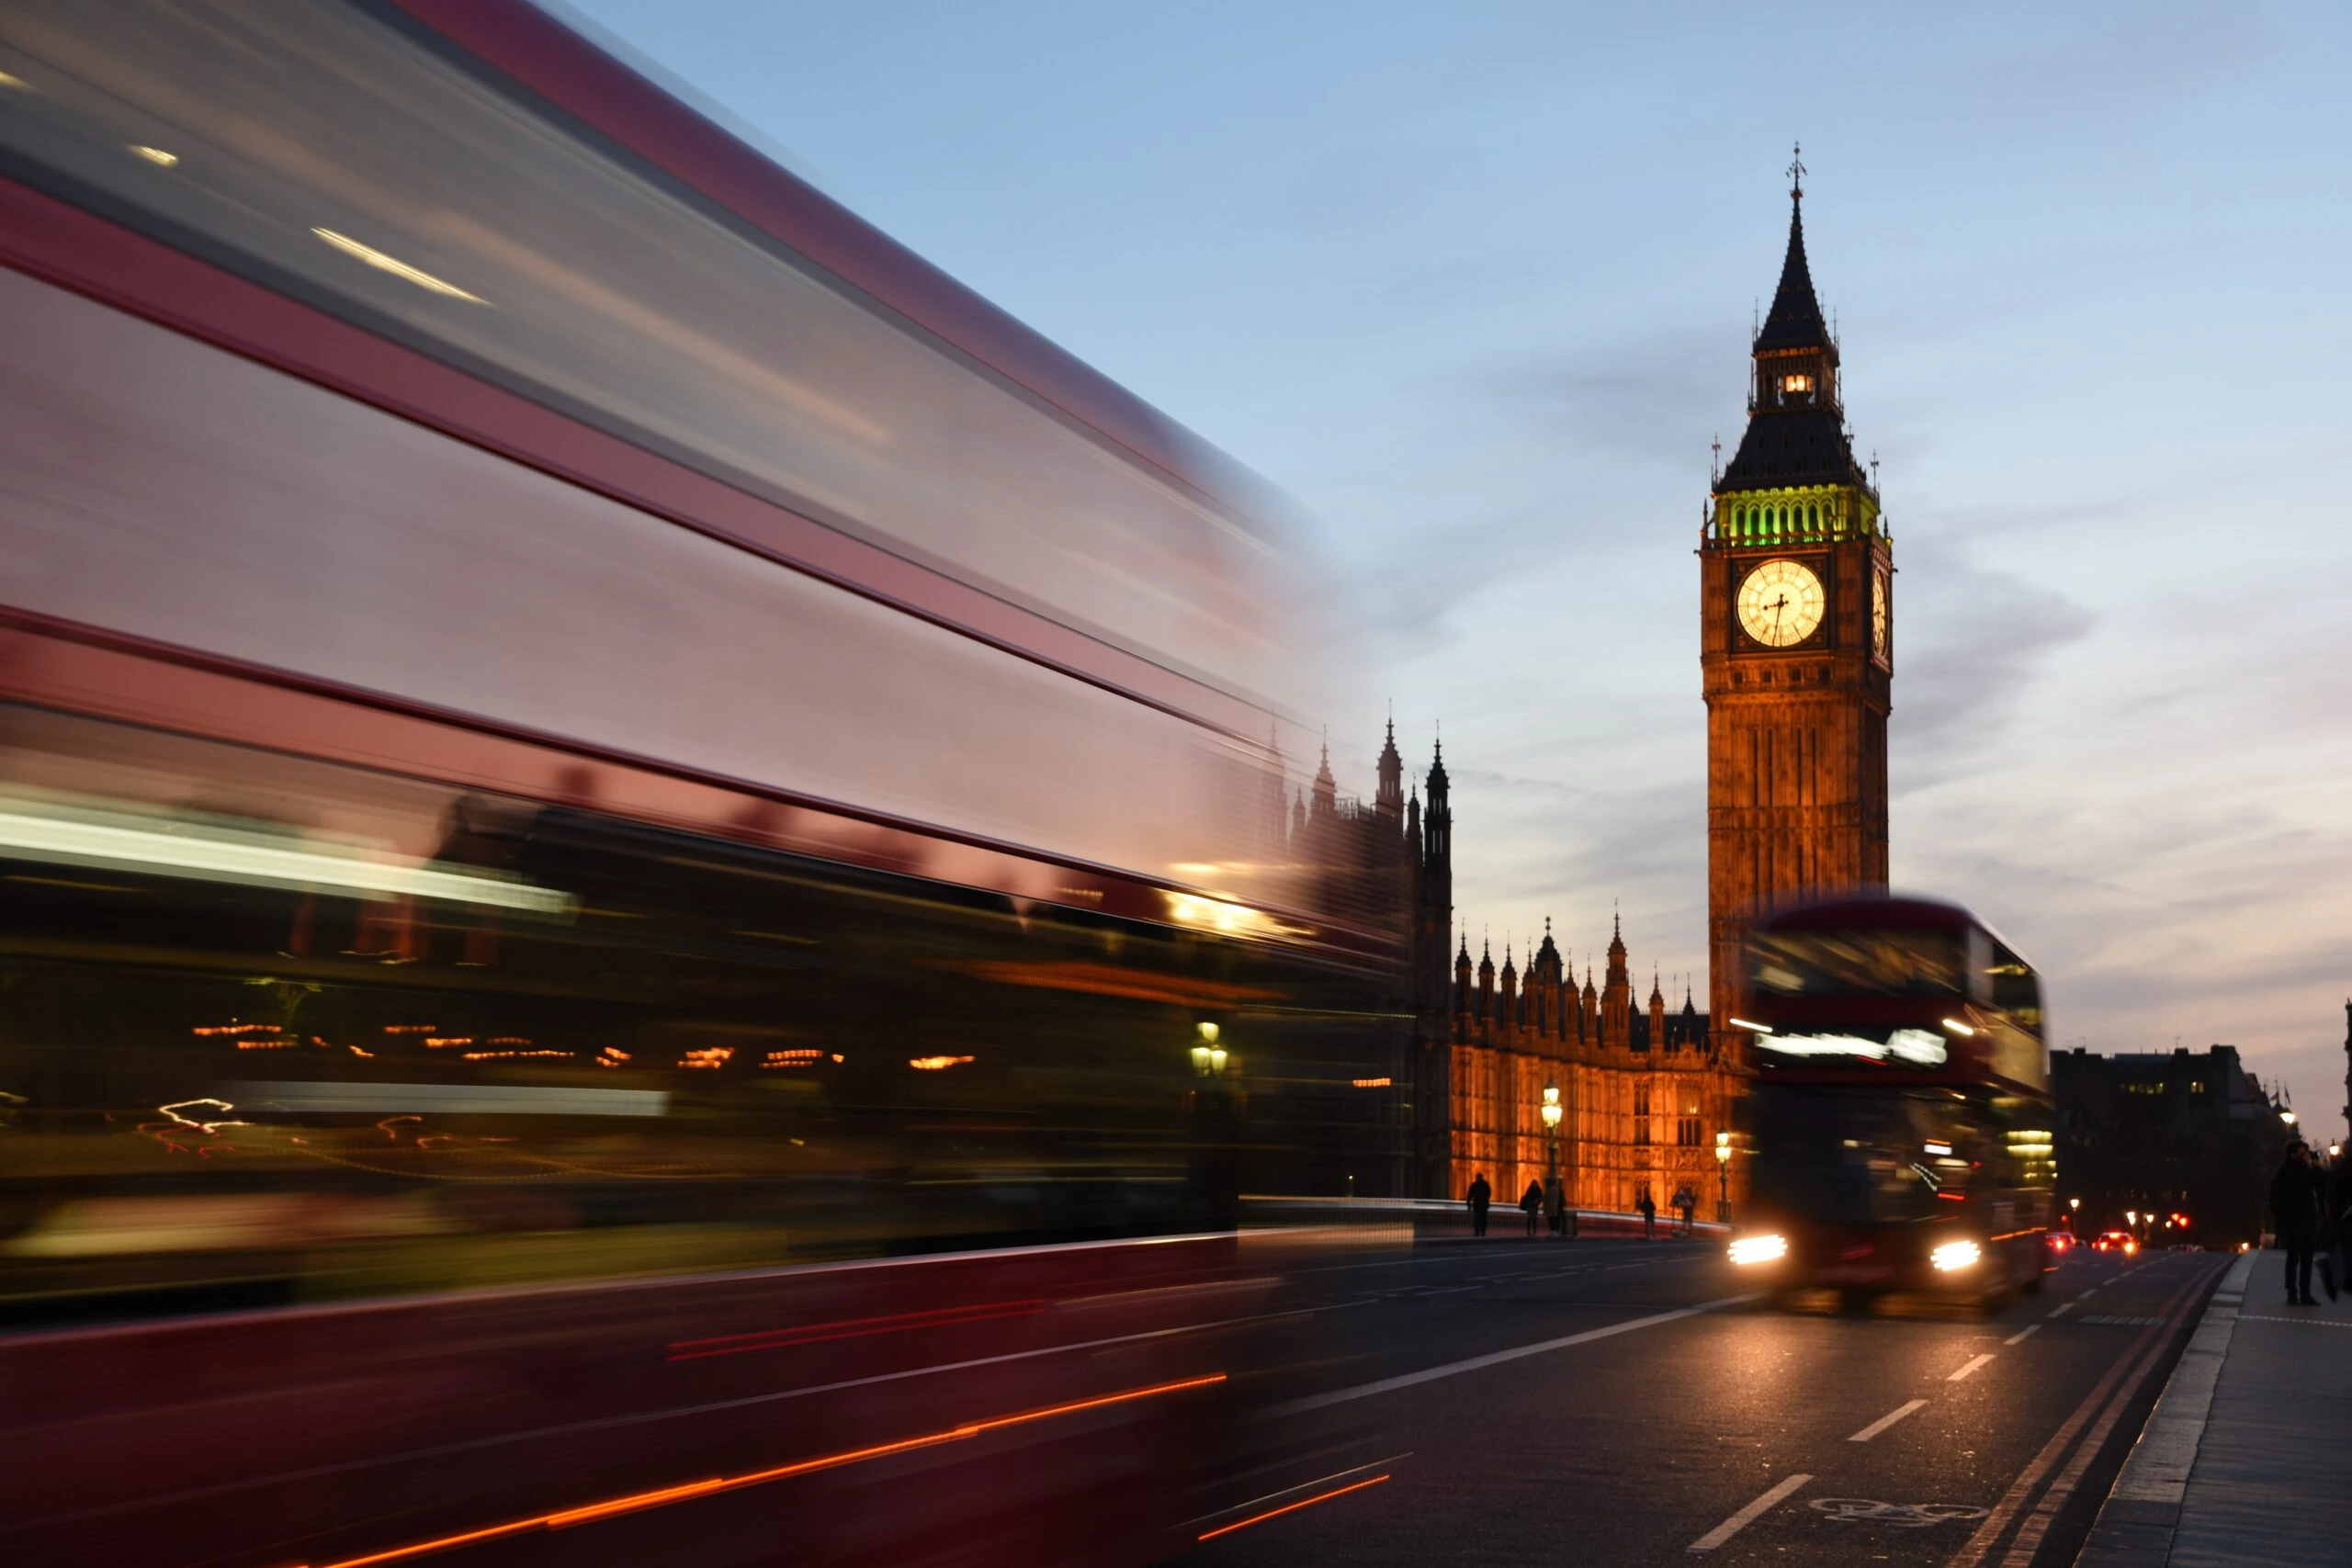 david-dibert-Double decker bus whizzing by with Big Ben in background London UK-unsplash-scaled